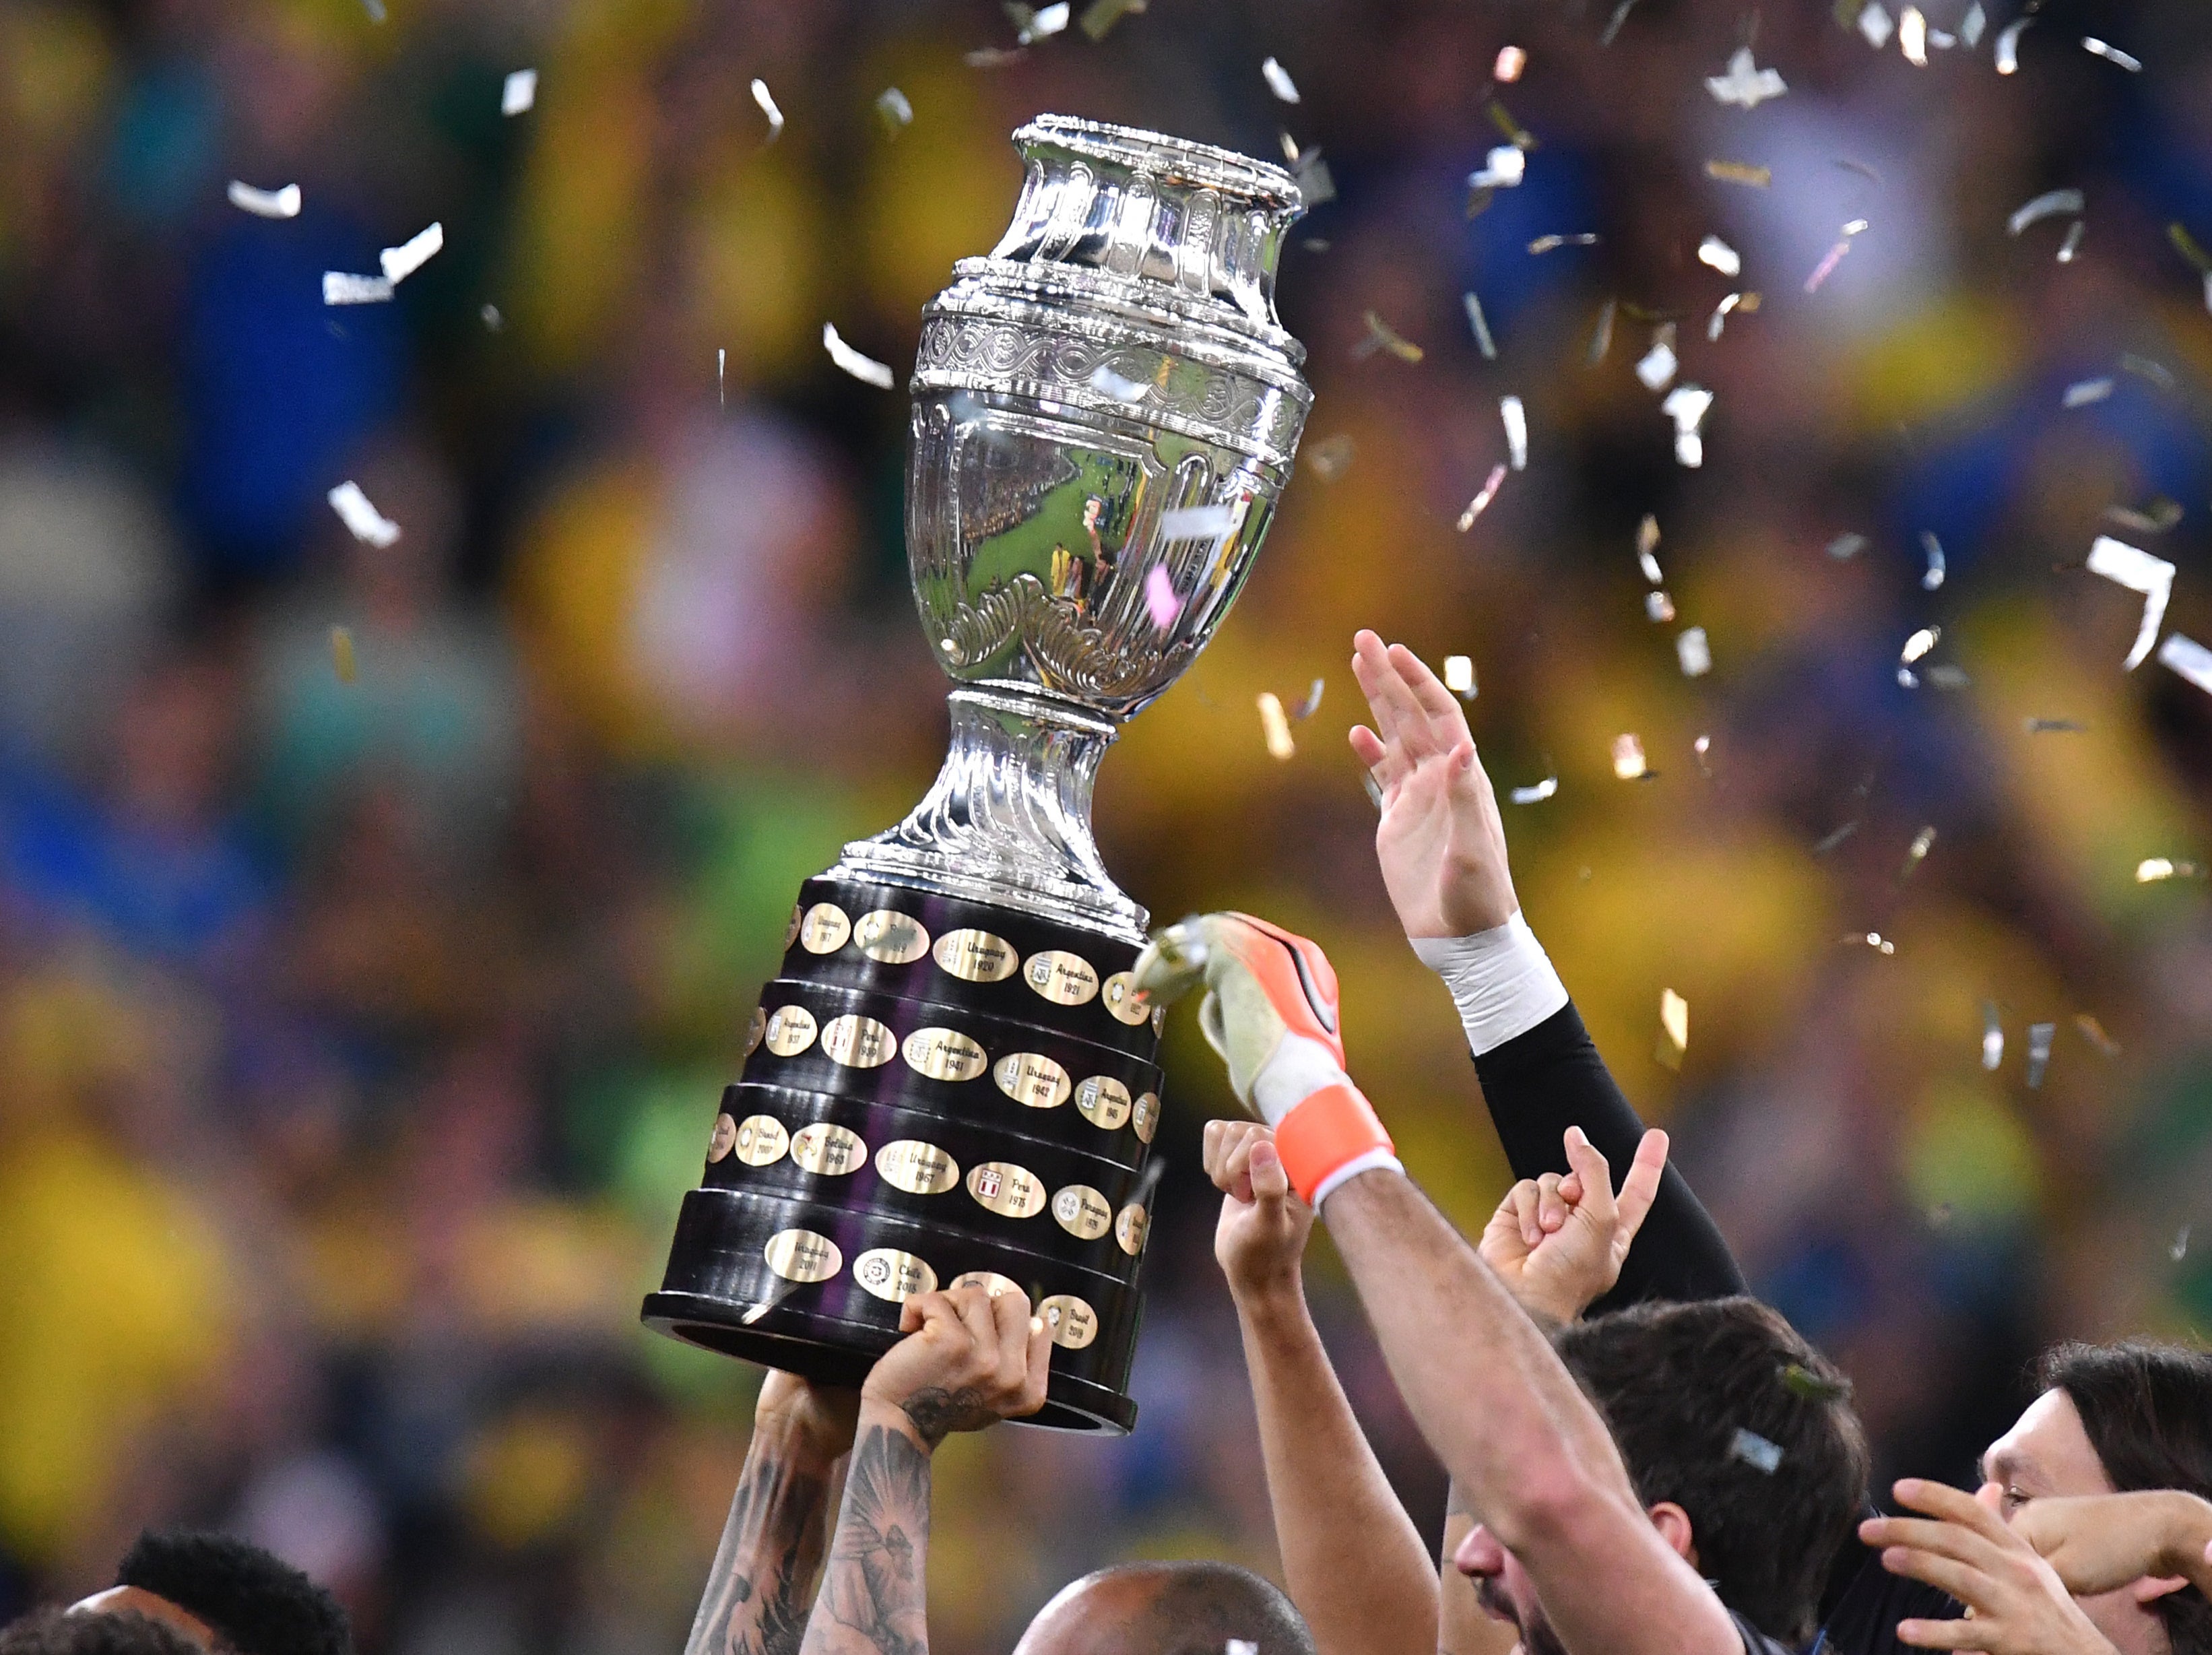 The 2019 Copa America was won by Brazil